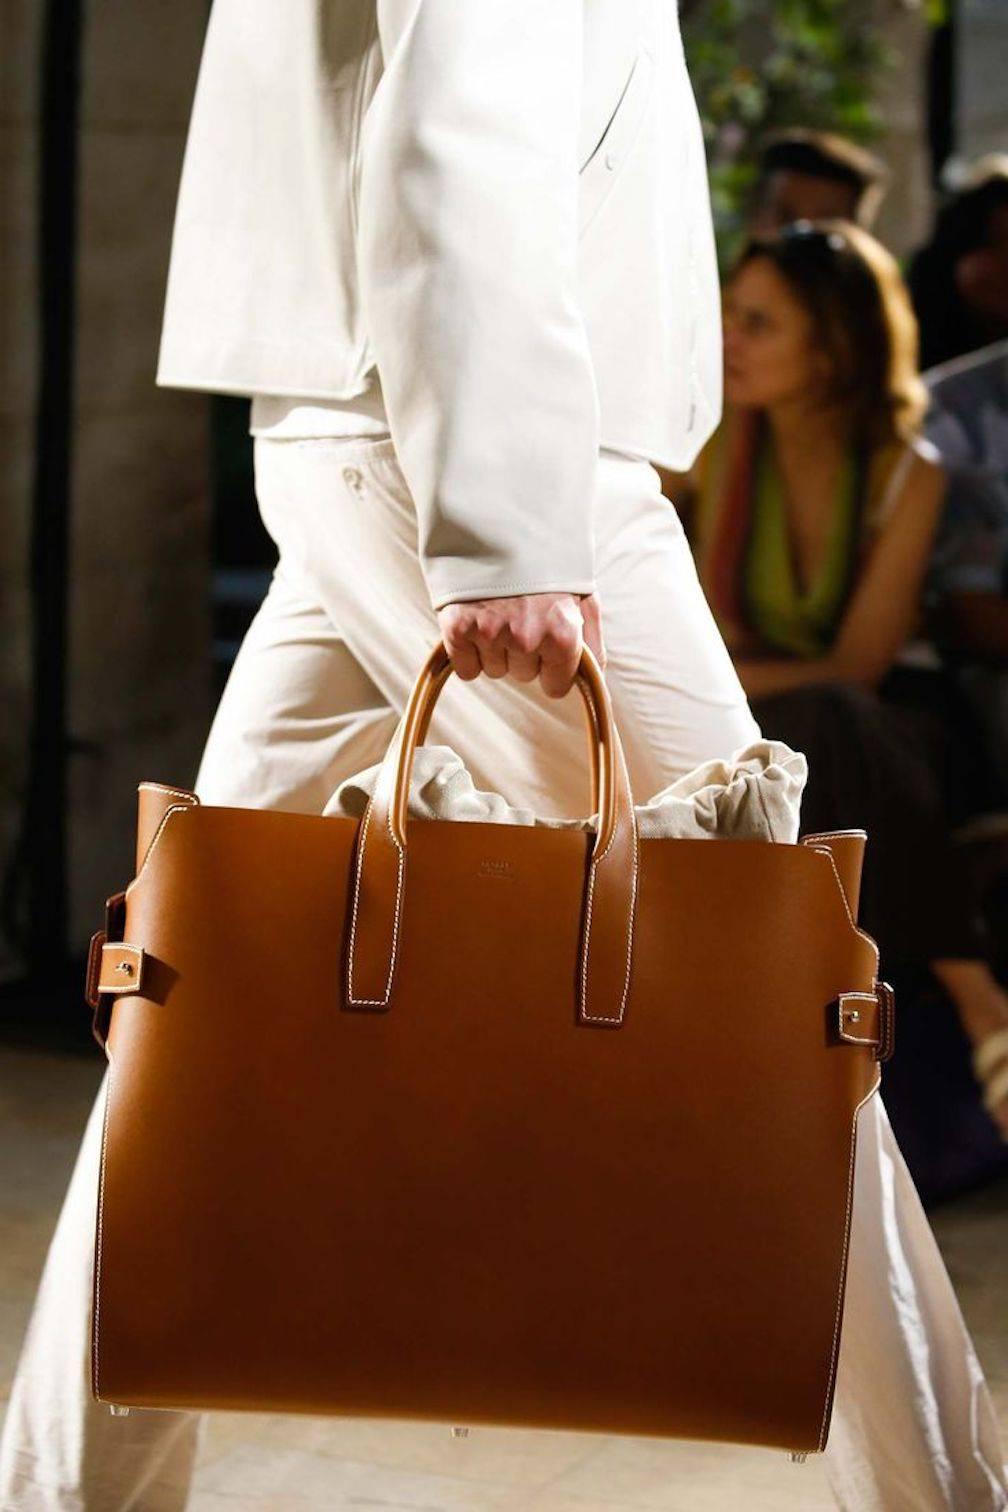 Hermes Runway Leather Cognac Men's Carryall Duffle Travel Weekender Tote Bag

Leather
Canvas
Palladium hardware 
Suede interior 
Drawstring closure
Made in France
Date code present 
Features removable canvas interior and shoulder strap
Handle drop